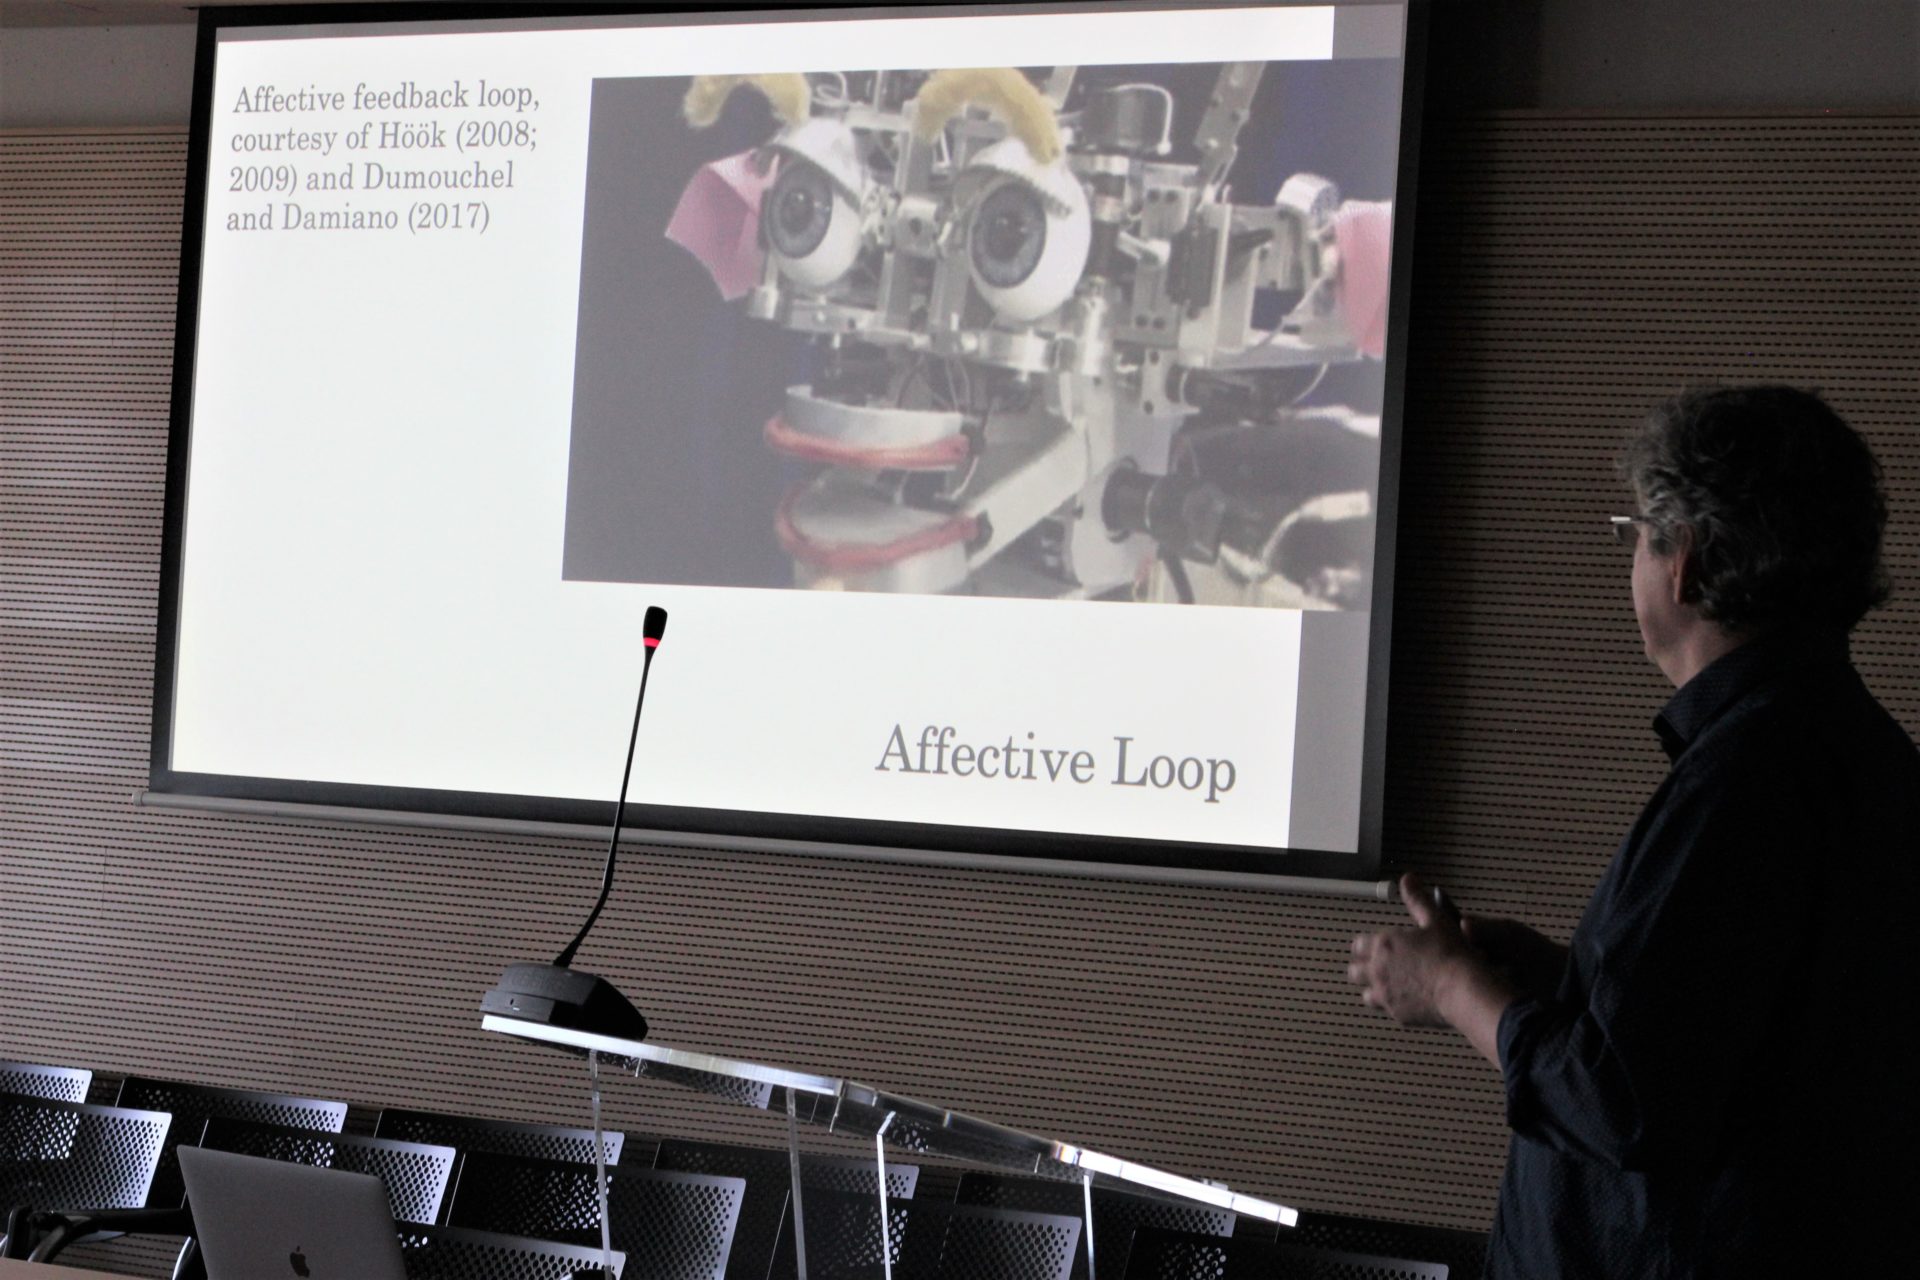 Mark Paterson stands to the side of a PowerPoint slide on a big screen showing affective feedback loops, featuring a humanoid robot’s face stripped of its “skin”.